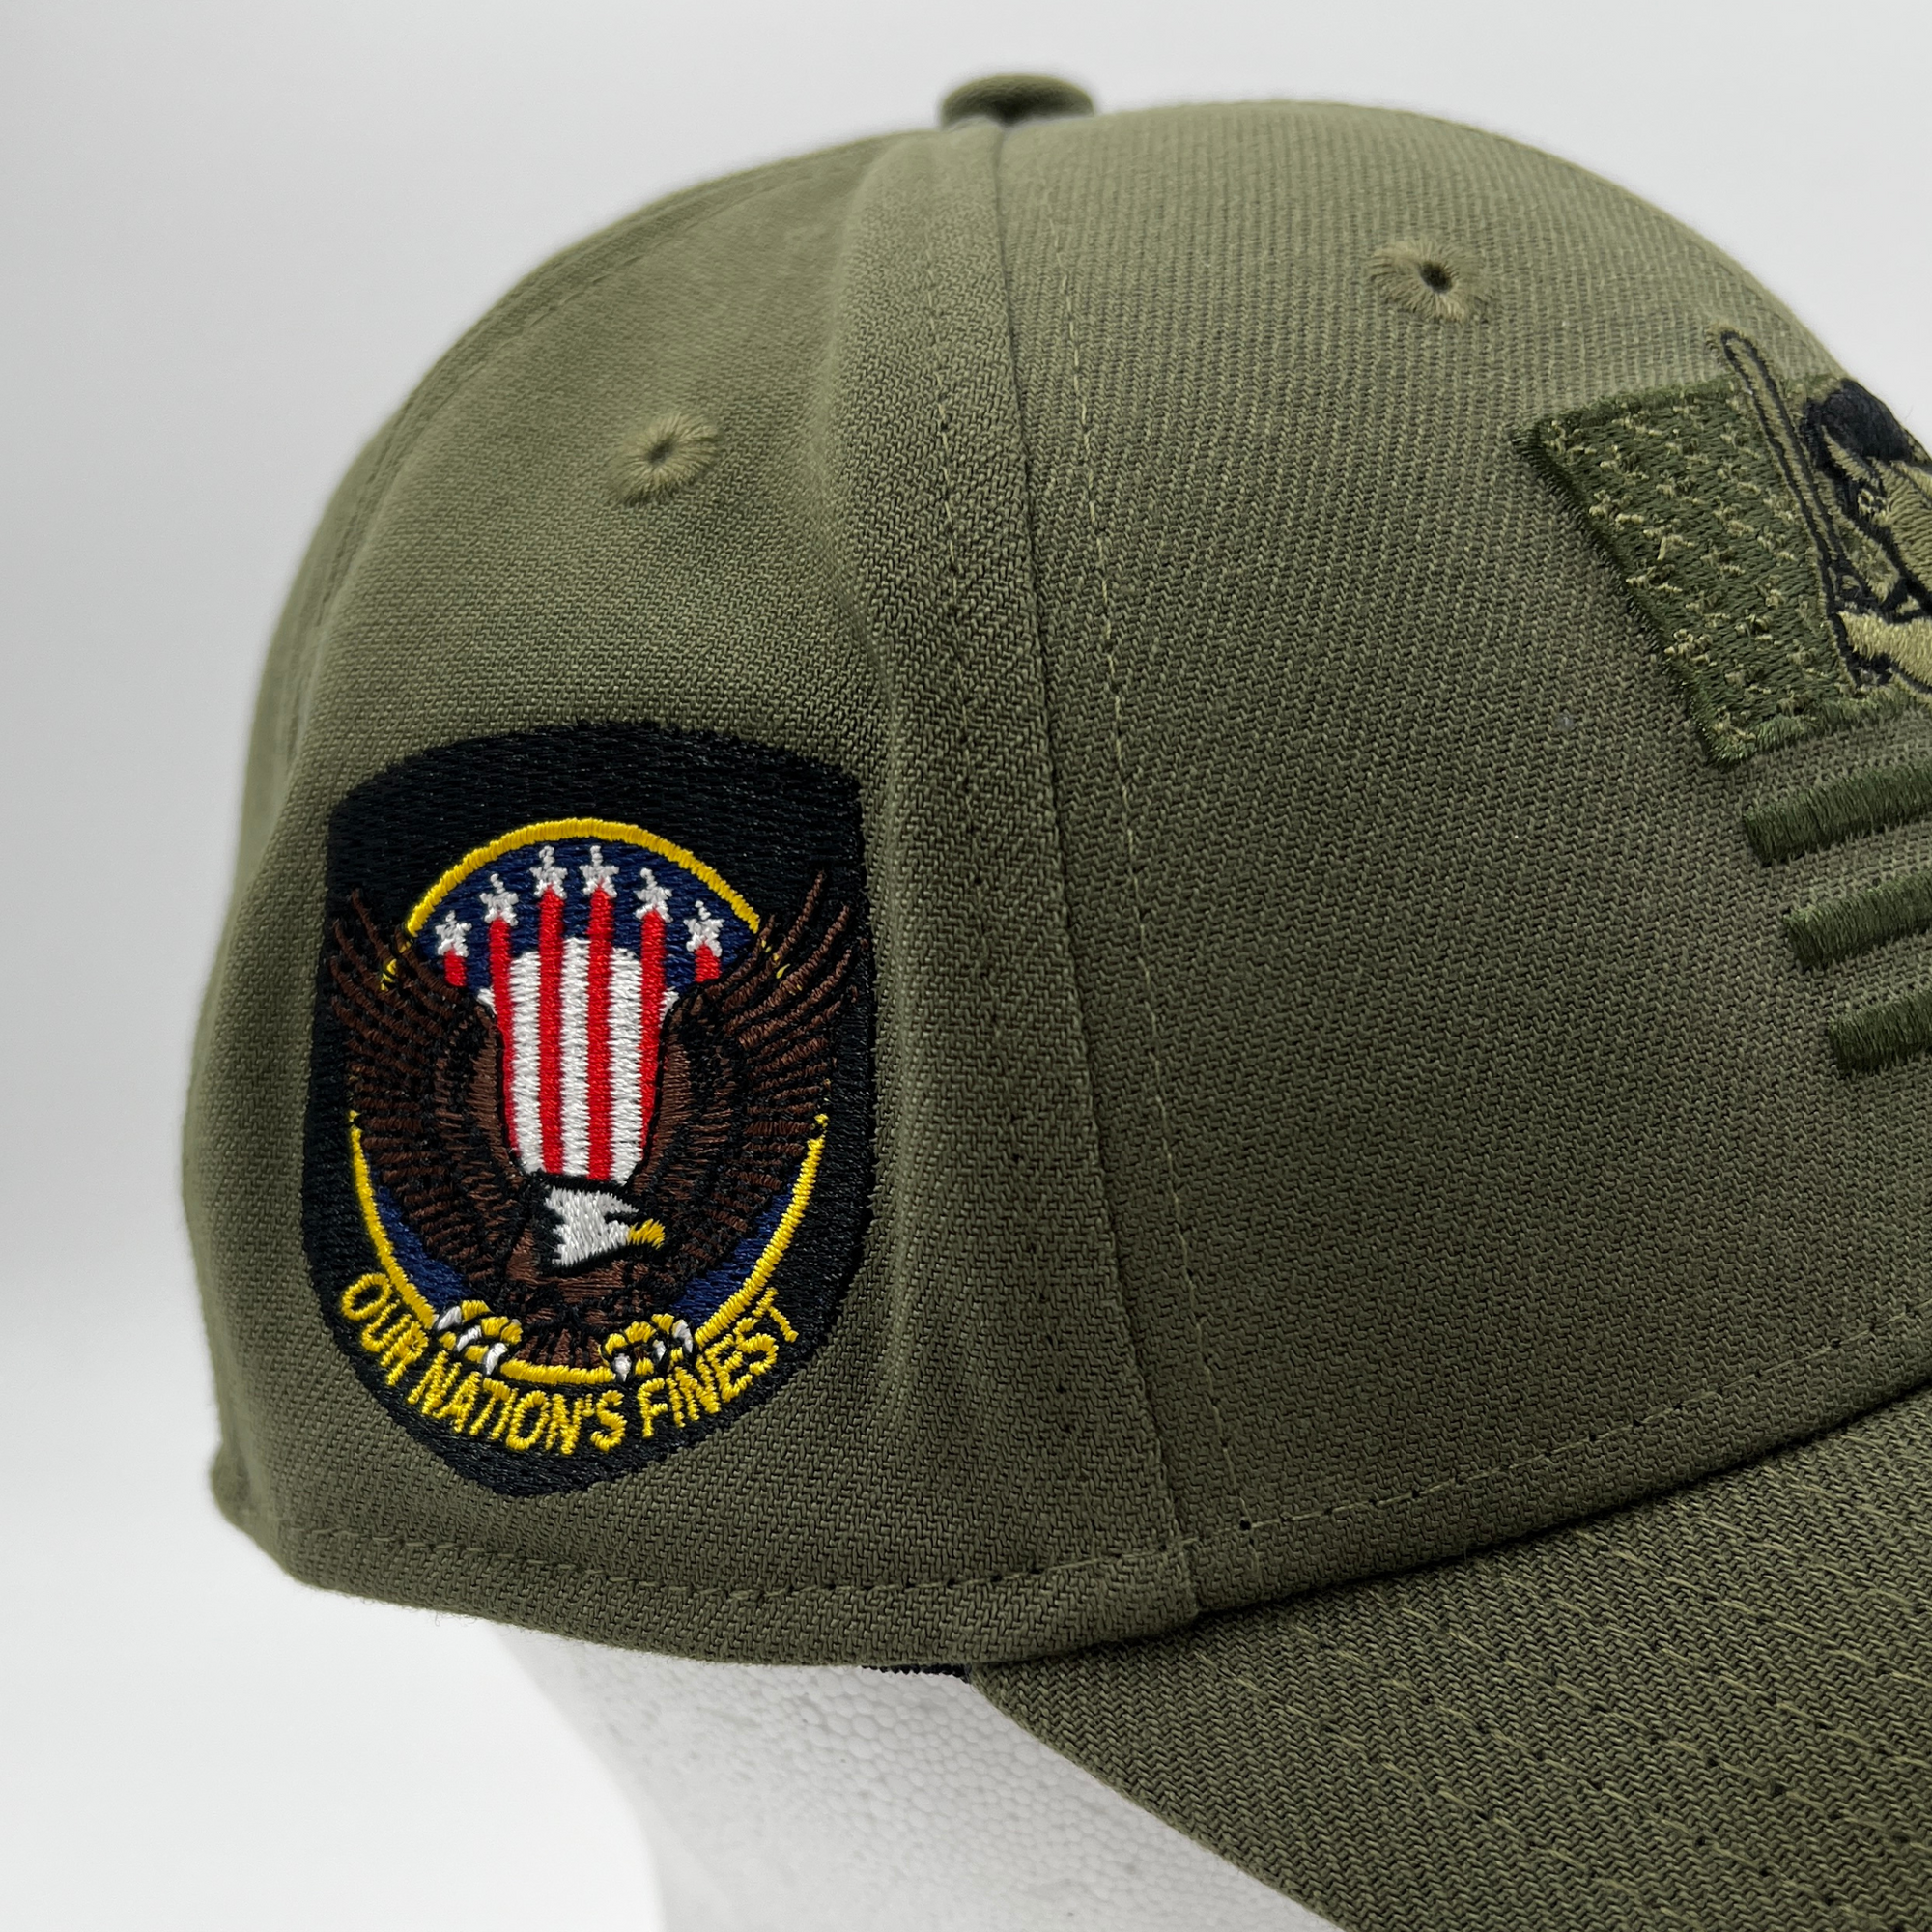 New Era Bisons Armed Forces Military Green Stretch Fit Hat